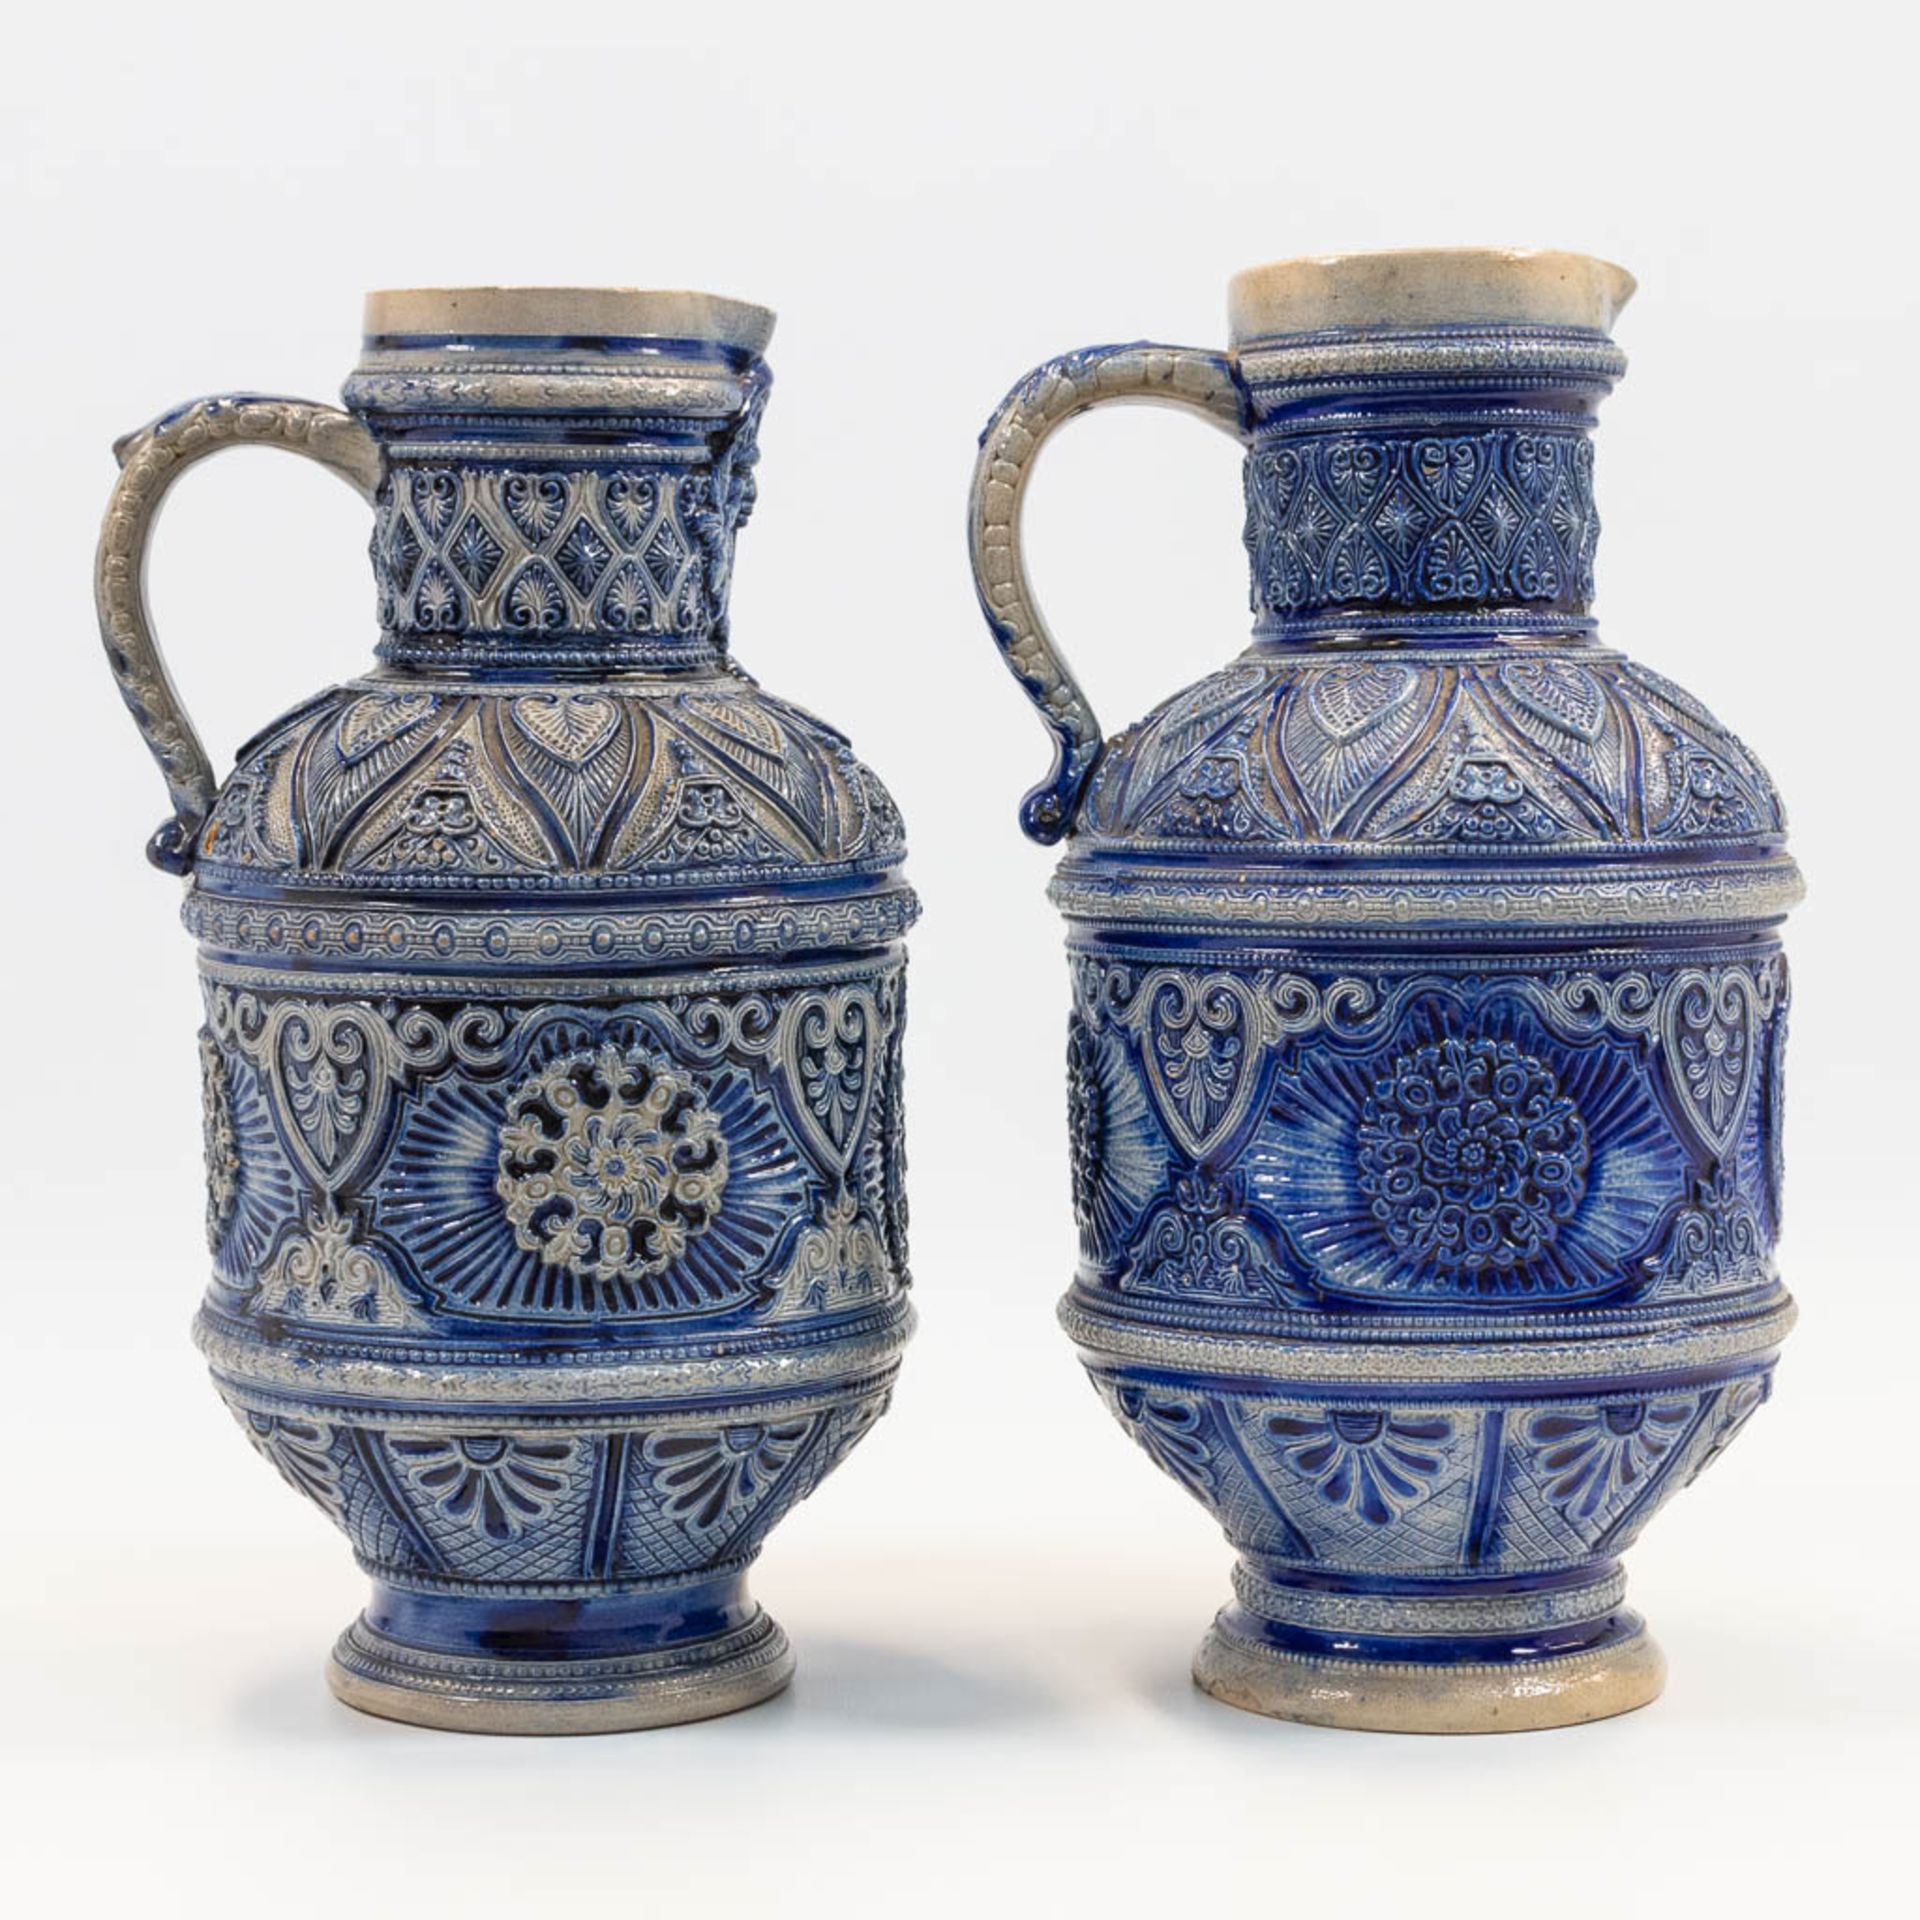 A collection of 2 Westerwald Pitchers with blue glaze, of which one has a Bartmann. (32 x 18 cm) - Image 7 of 14